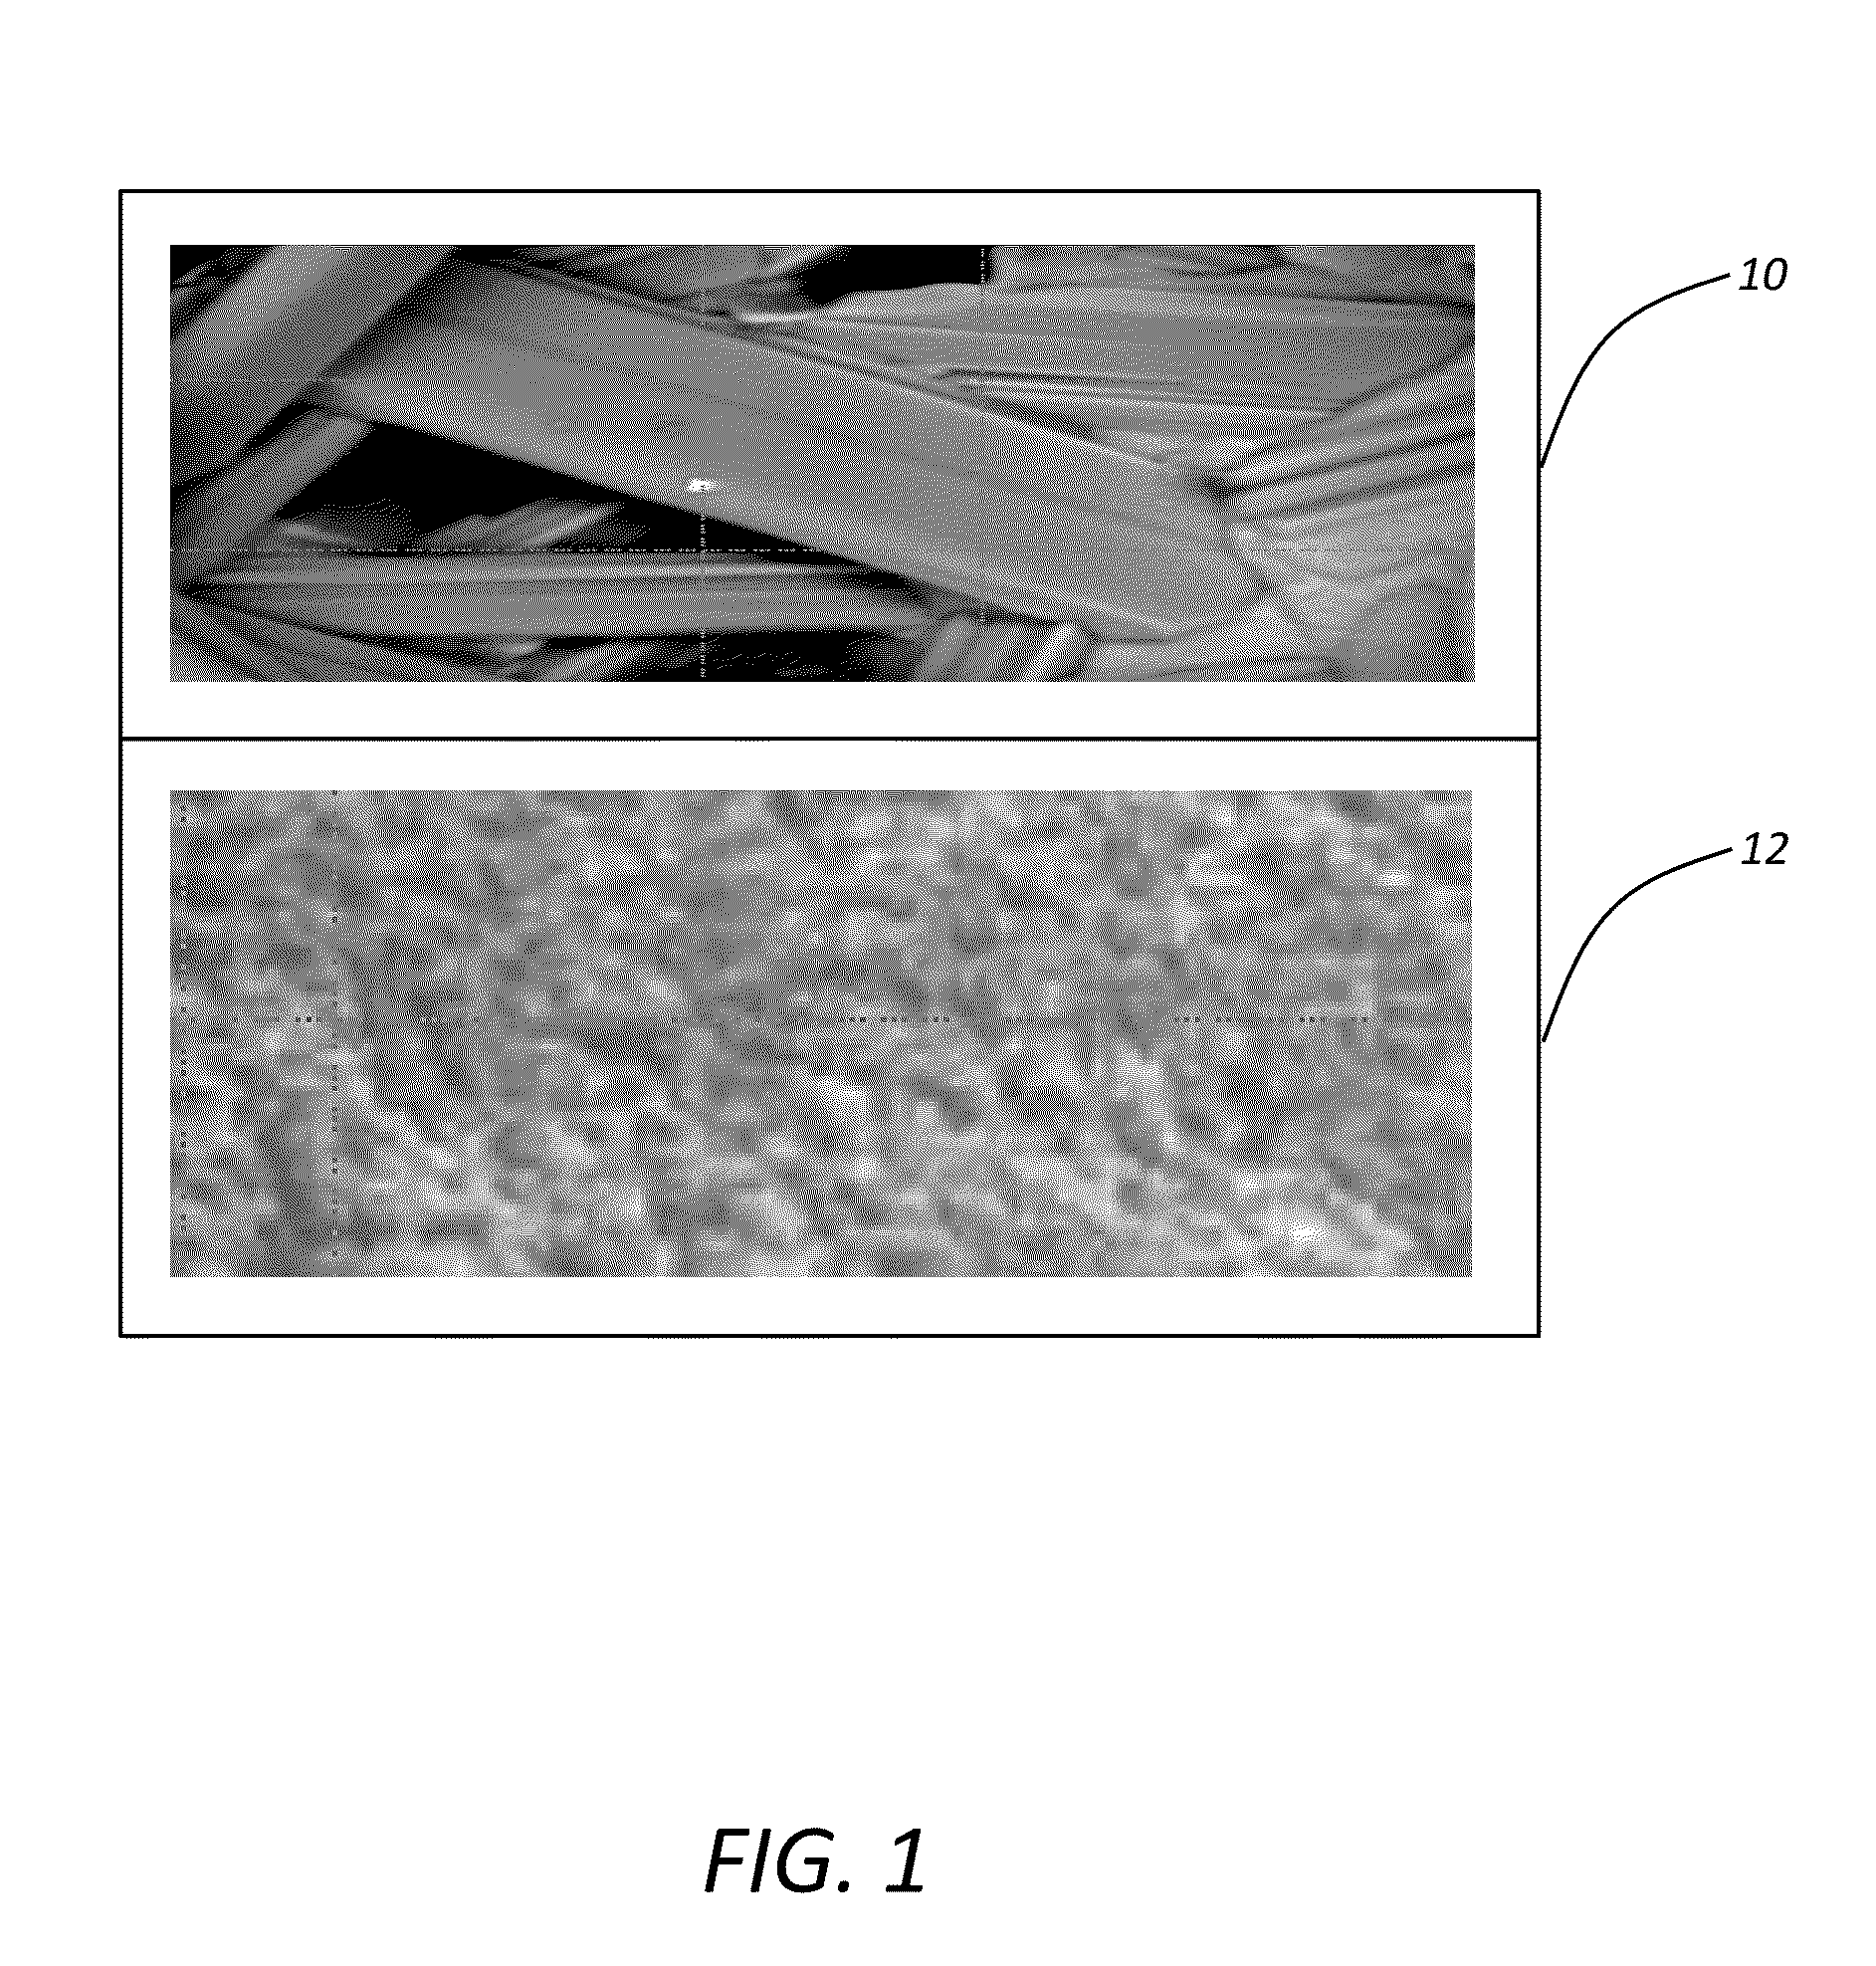 Hardface coating systems and methods for metal alloys and other materials for wear and corrosion resistant applications